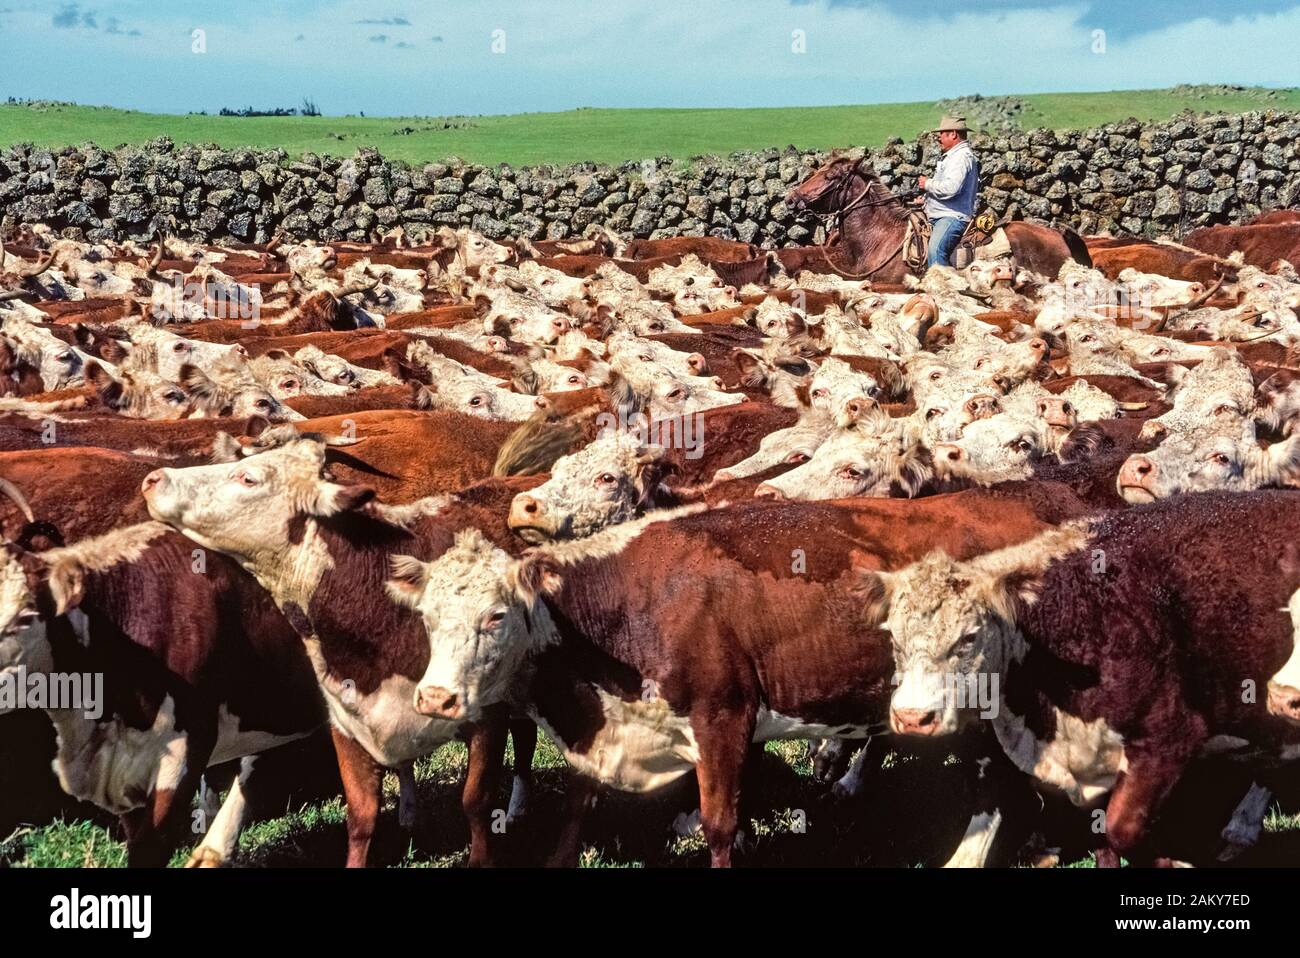 A Hawaiian cowboy known as a paniolo helps gather a big herd of white-faced beef cattle behind a fence of lava rocks during a roundup at the historic Parker Ranch on the Big Island of Hawaii in Hawaii, USA. Native Hawaiians became cowboys as long ago as 1847 when the cattle ranch was established on that Pacific Ocean island and grew to become one of the largest privately-owned ranches in the United States. Nowadays about 17,000 head of beef cattle graze on the Parker Ranch's rolling grasslands that cover 130,000 acres (52,610 hectares) in the center of the Big Island. Stock Photo